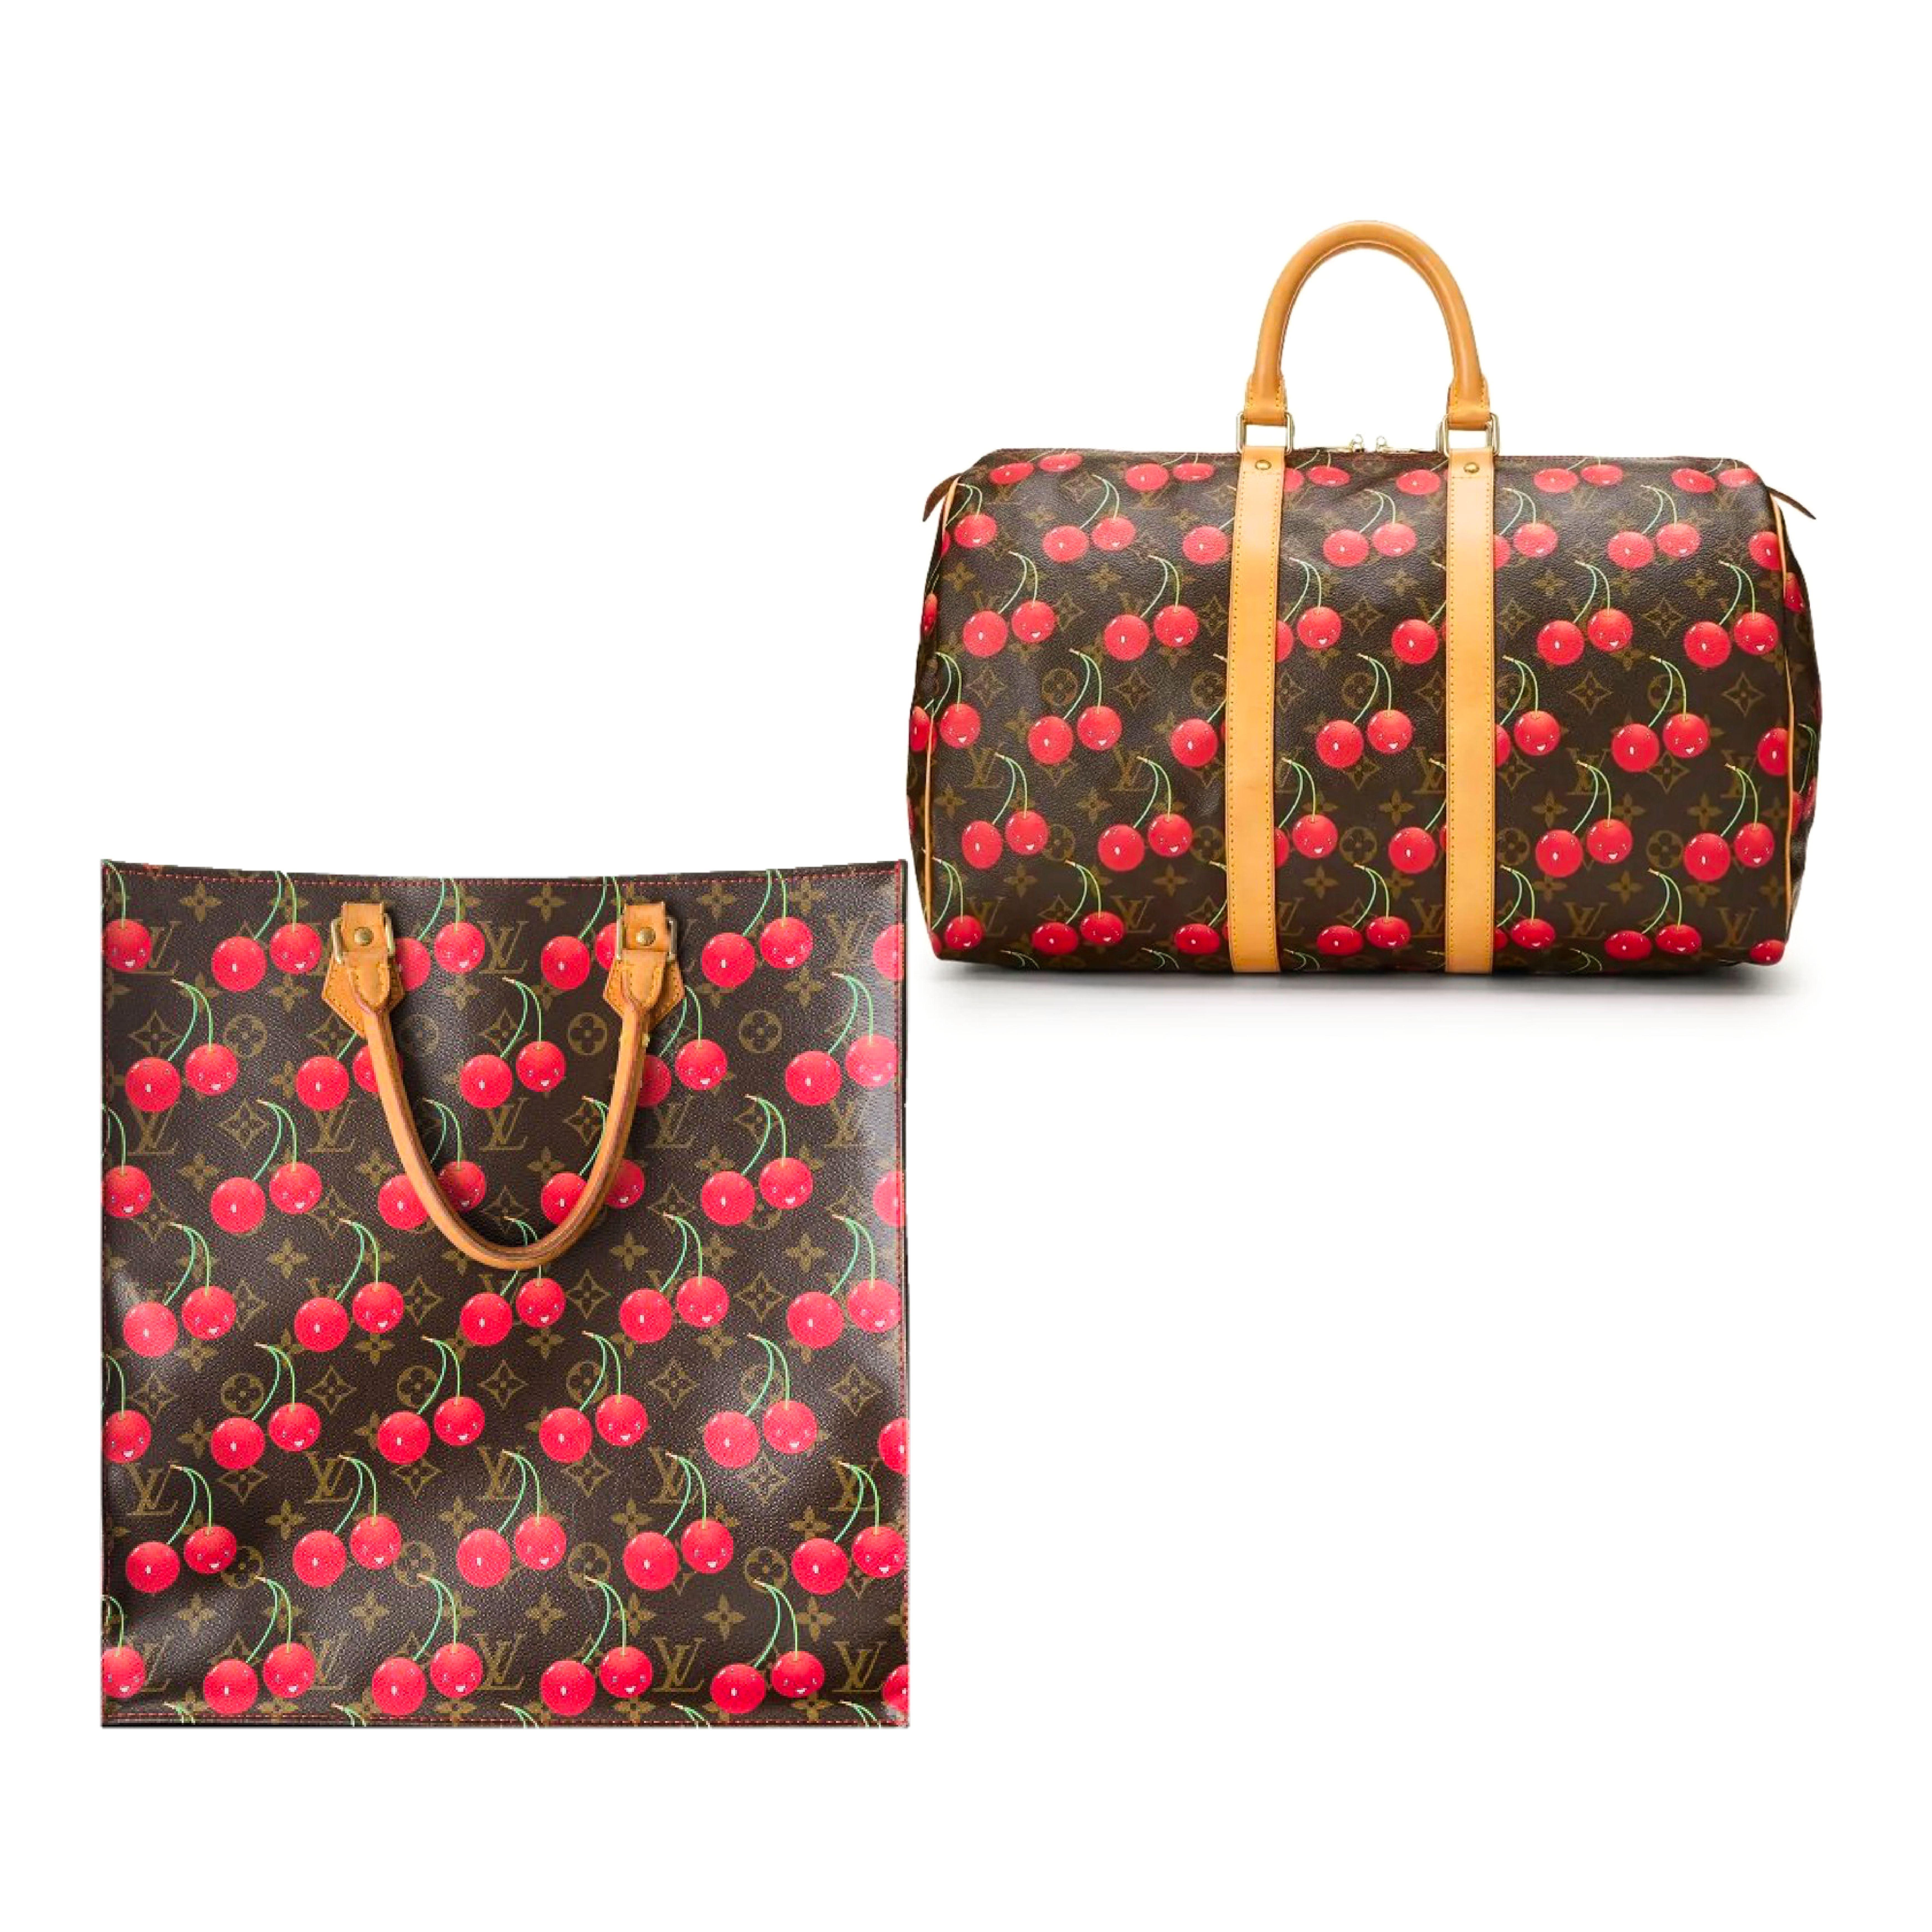 Takashi Murakami Louis Vuitton cherry monogram Sac Plat Tote & Keepall bags 2005. Extremely rare and highly collectible. Early aughts collaboration between Takashi Murakami and the house of Louis Vuitton with Marc Jacobs at its helm.